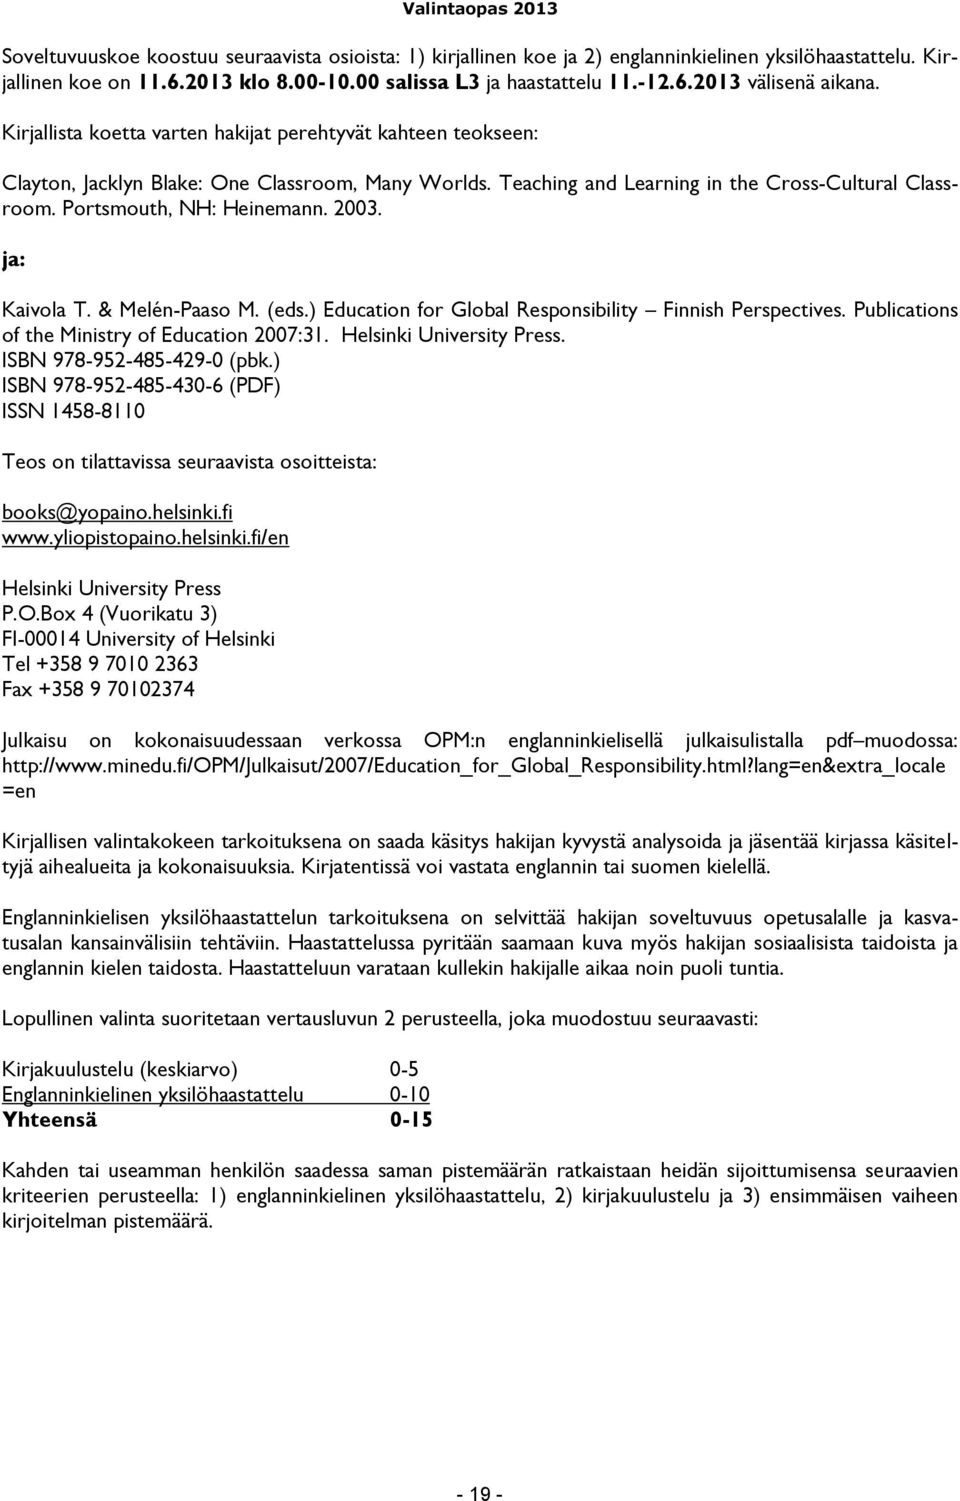 2003. ja: Kaivola T. & Melén-Paaso M. (eds.) Education for Global Responsibility Finnish Perspectives. Publications of the Ministry of Education 2007:31. Helsinki University Press.